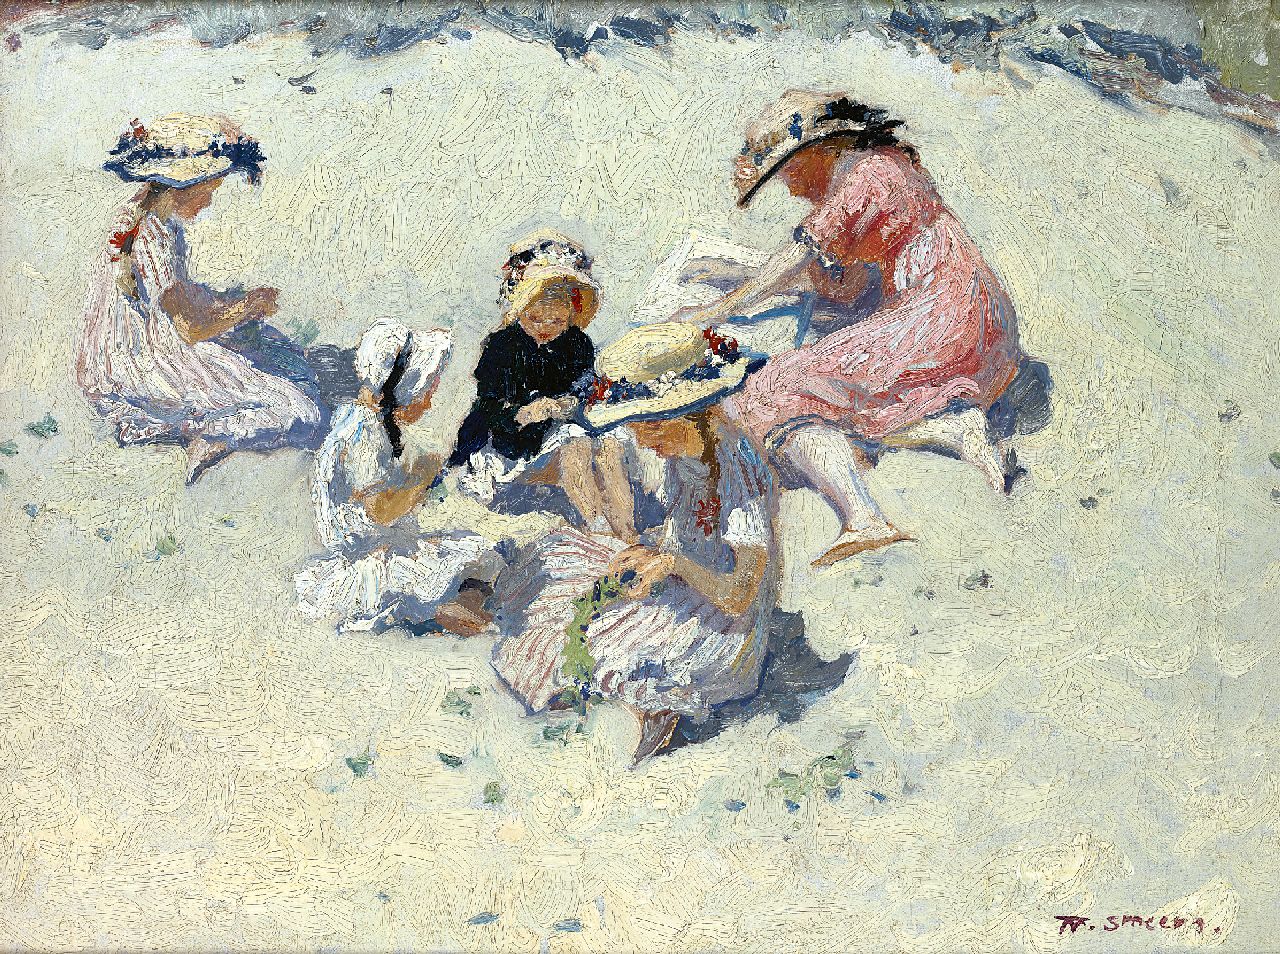 Smeers F.  | Frans Smeers, Children in the dunes, Öl auf Leinwand 45,3 x 60,4 cm, signed l.r. und painted 1911 on the reverse